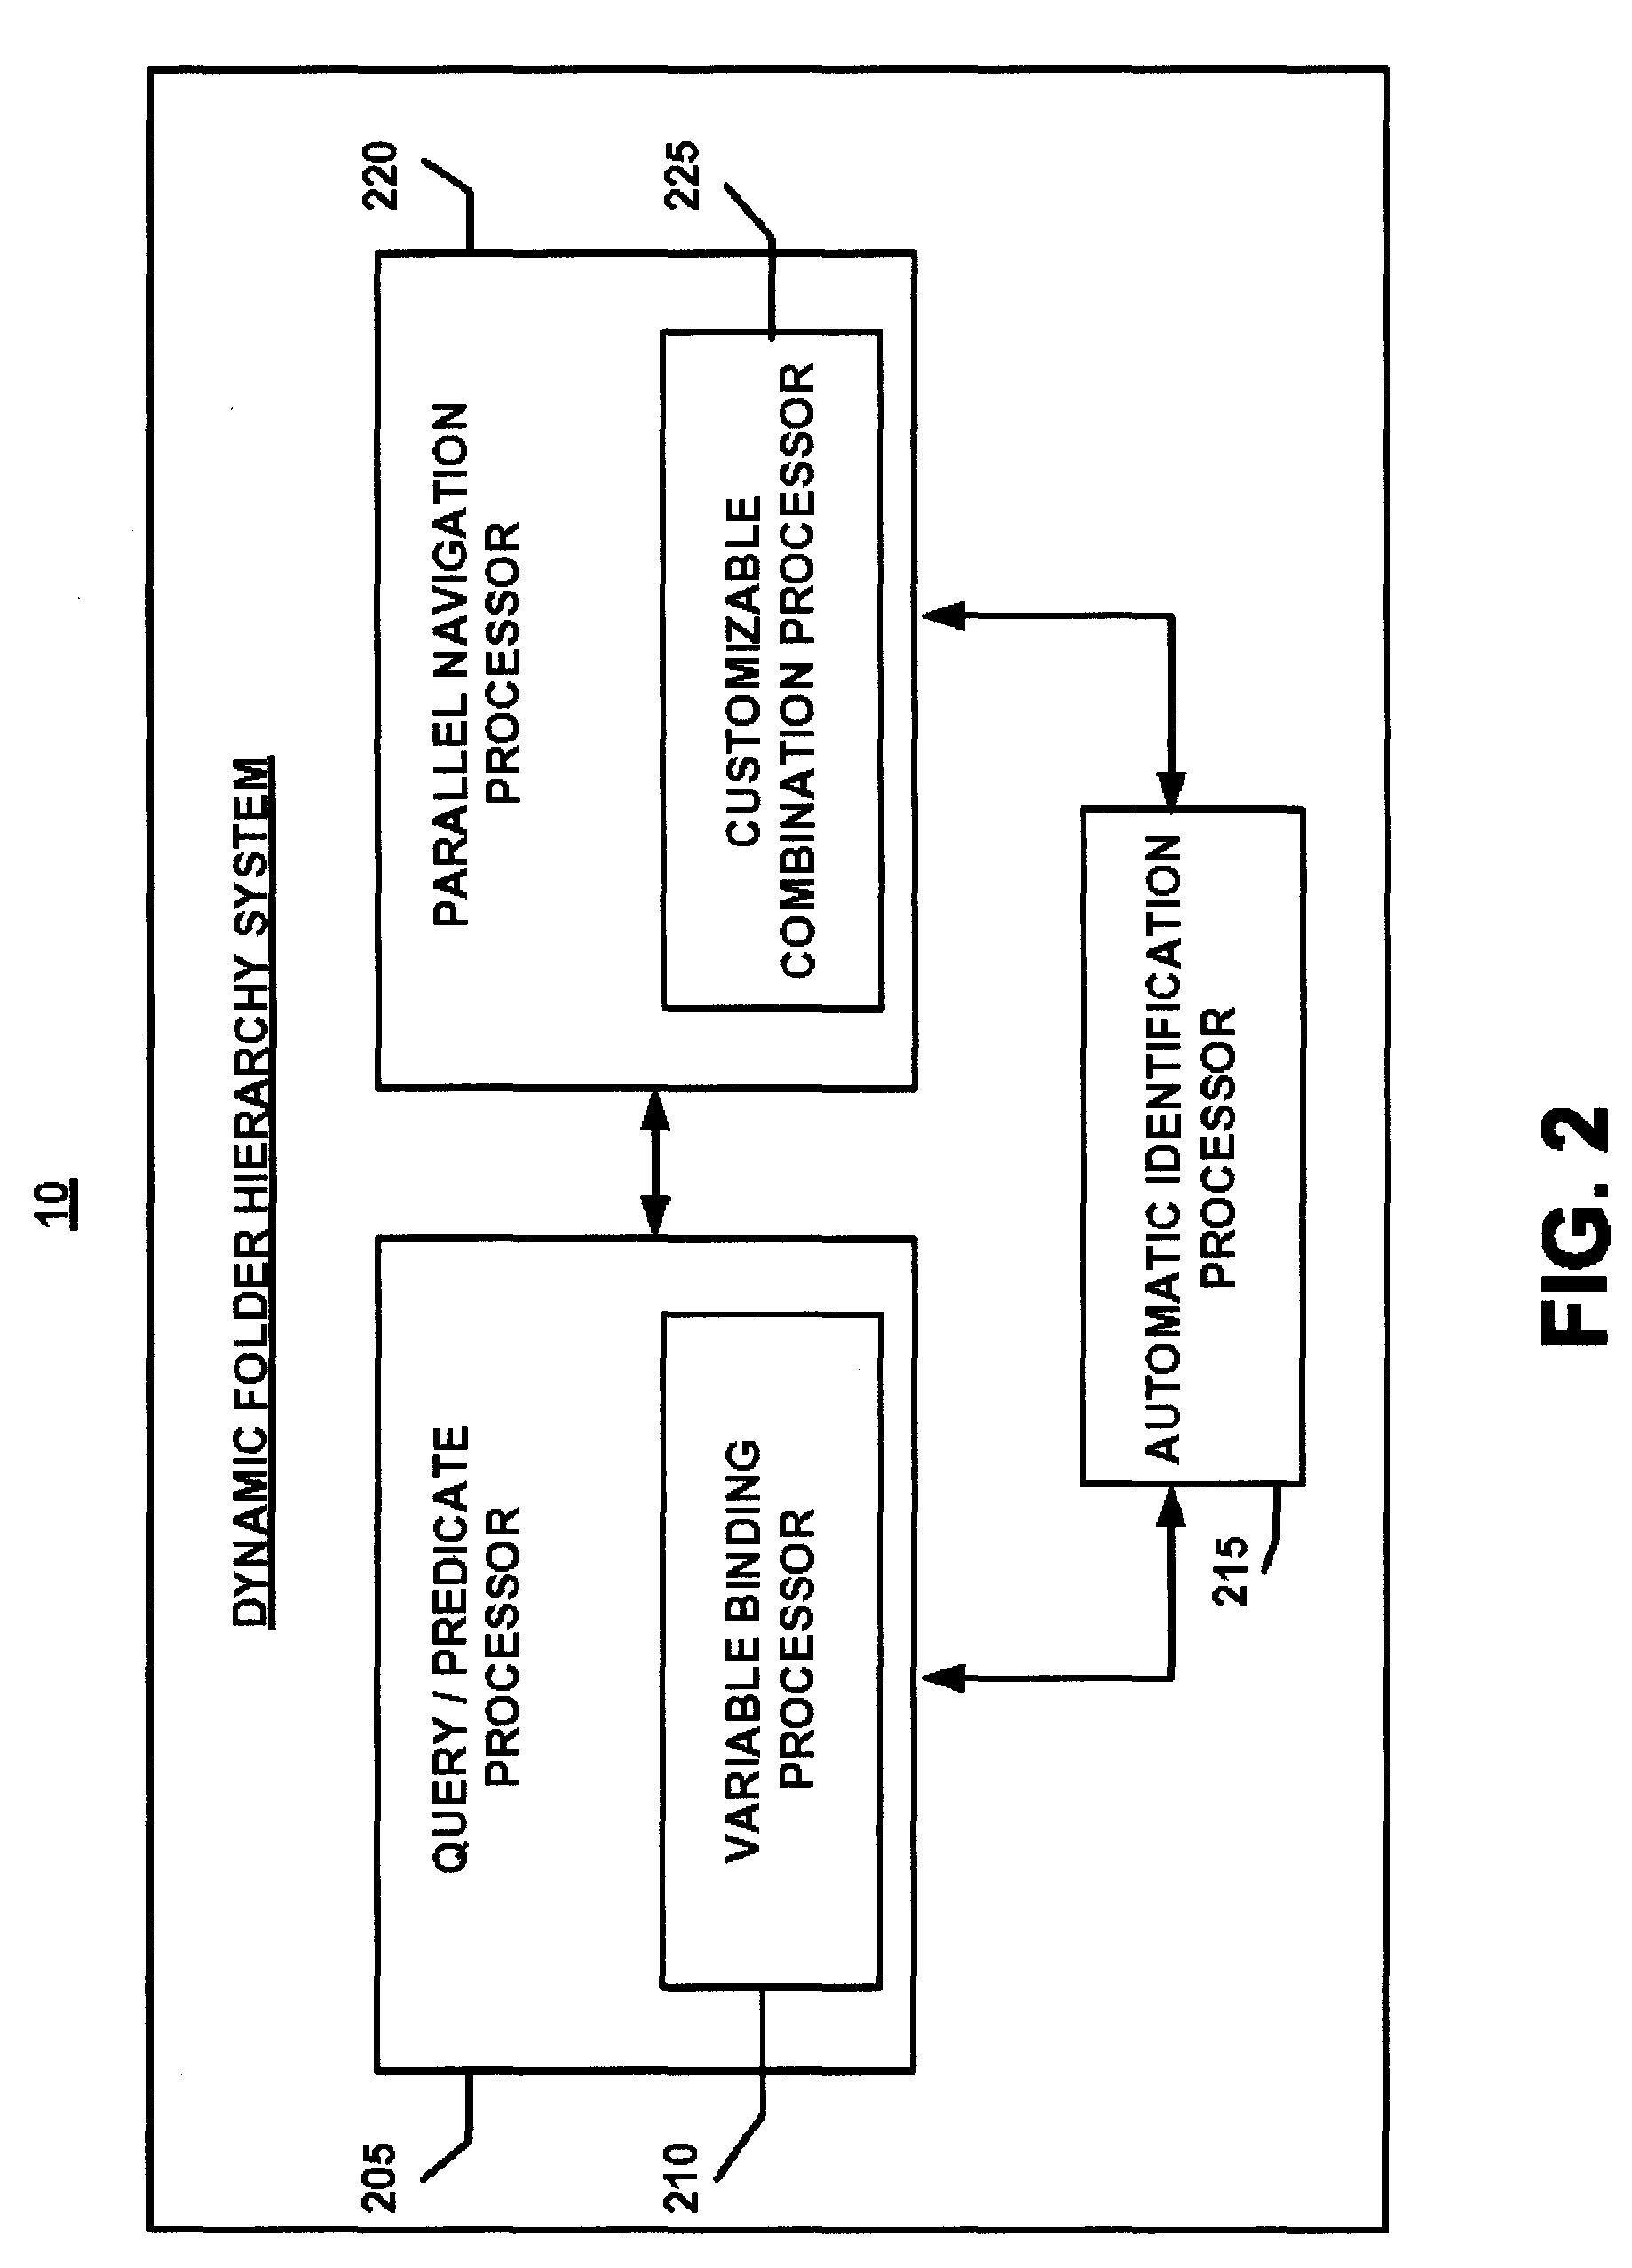 System and method for creating dynamic folder hierarchies